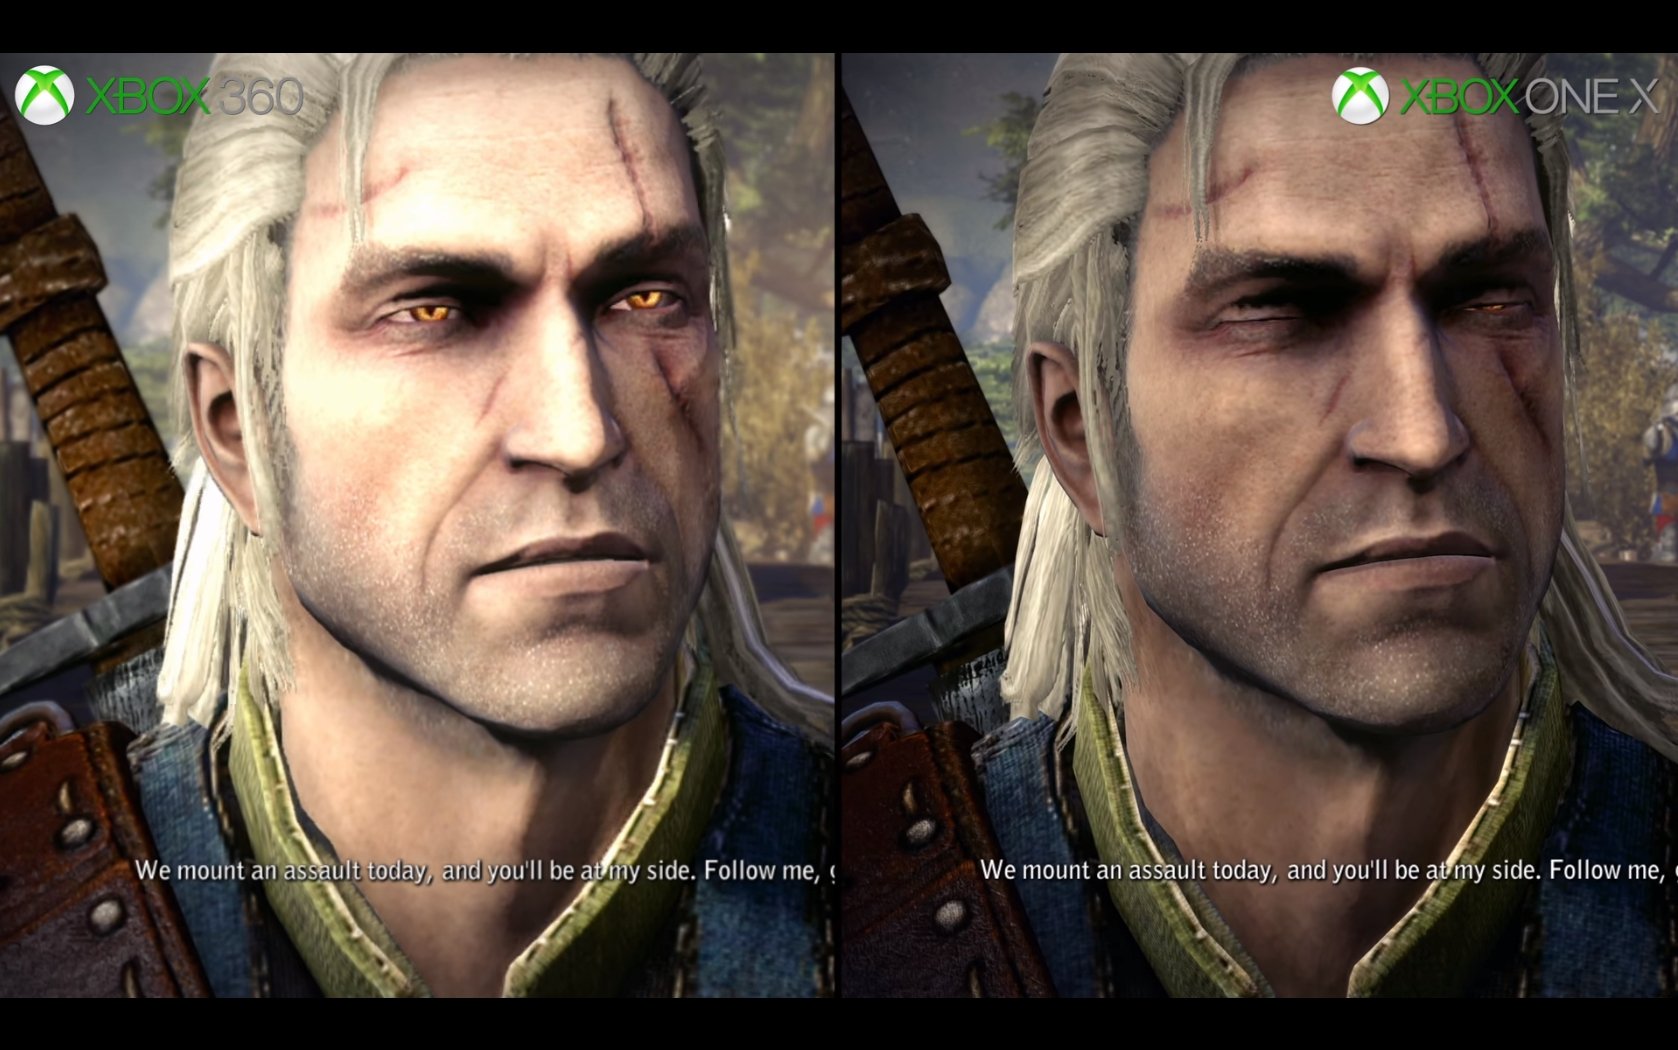 The Witcher 2: Assassins of Kings — Enhanced Edition